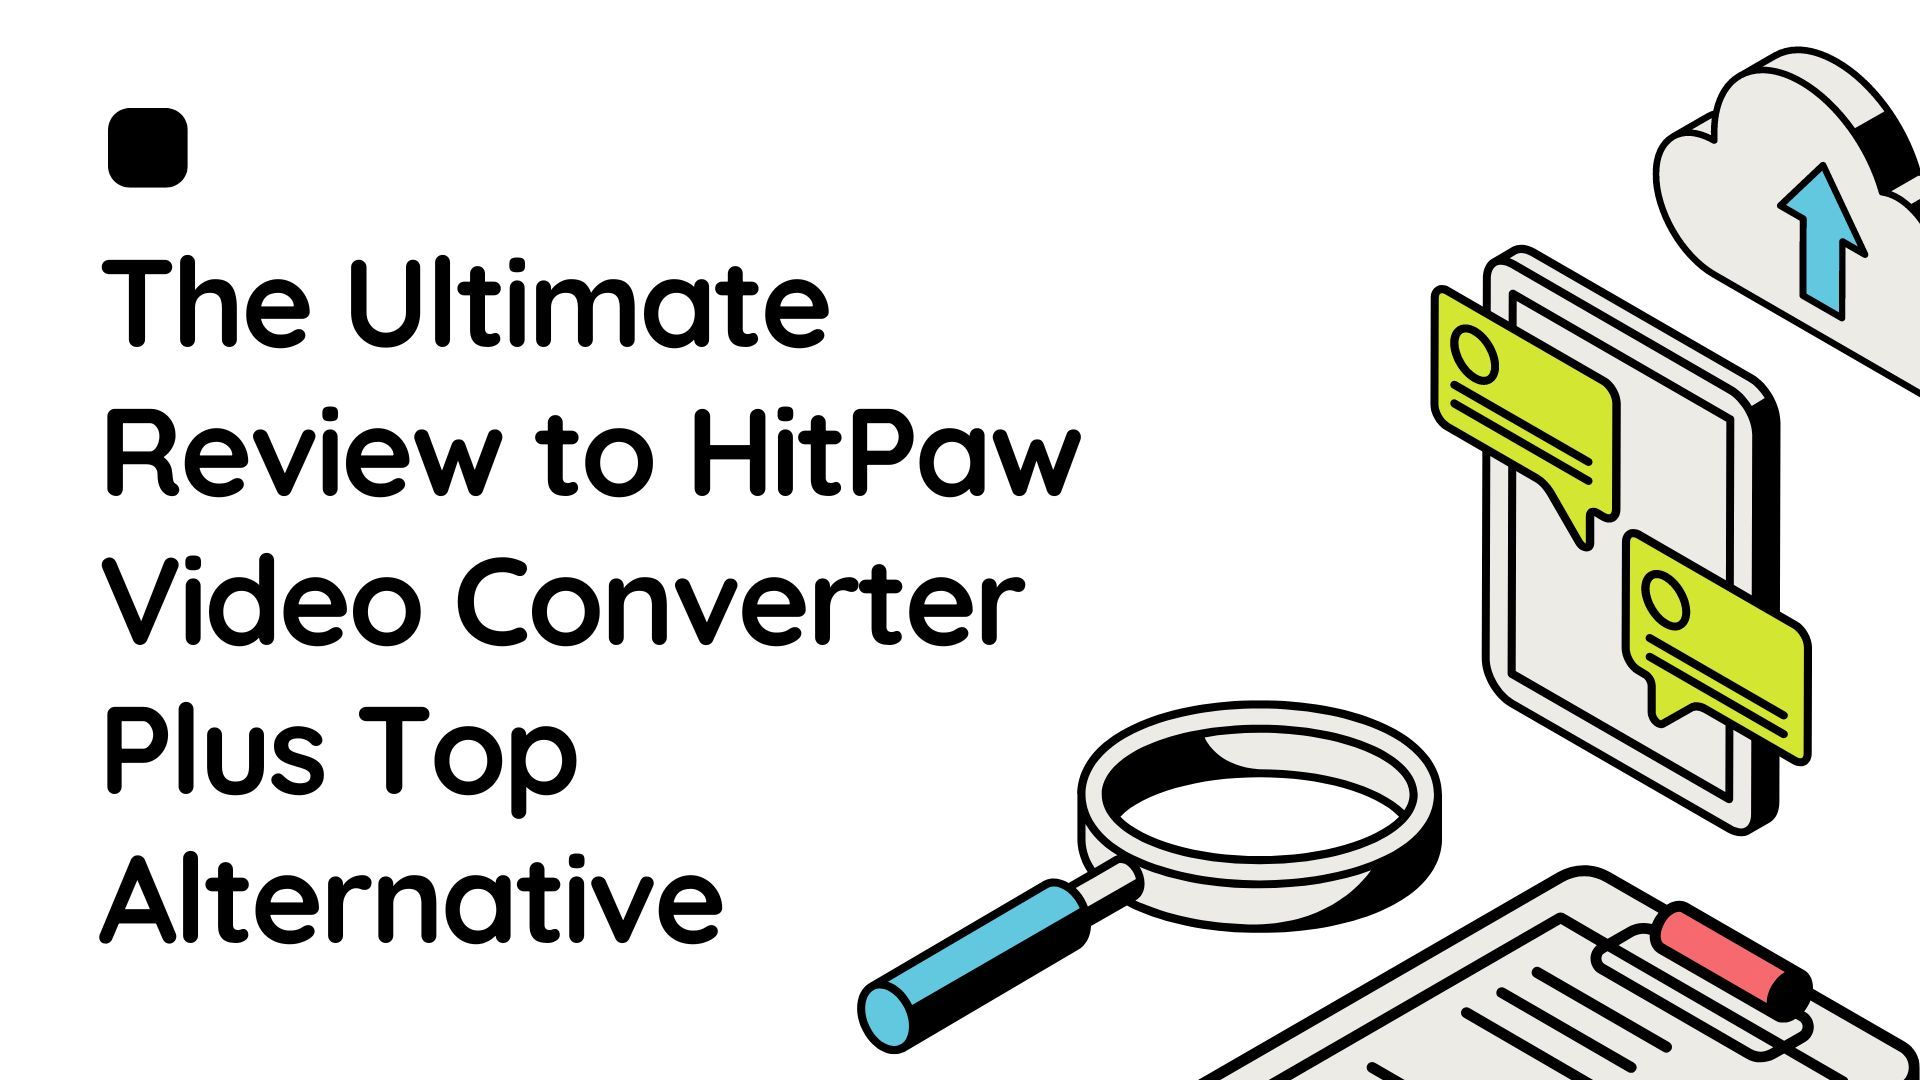 The Ultimate Review to HitPaw Video Converter Plus Top Alternative